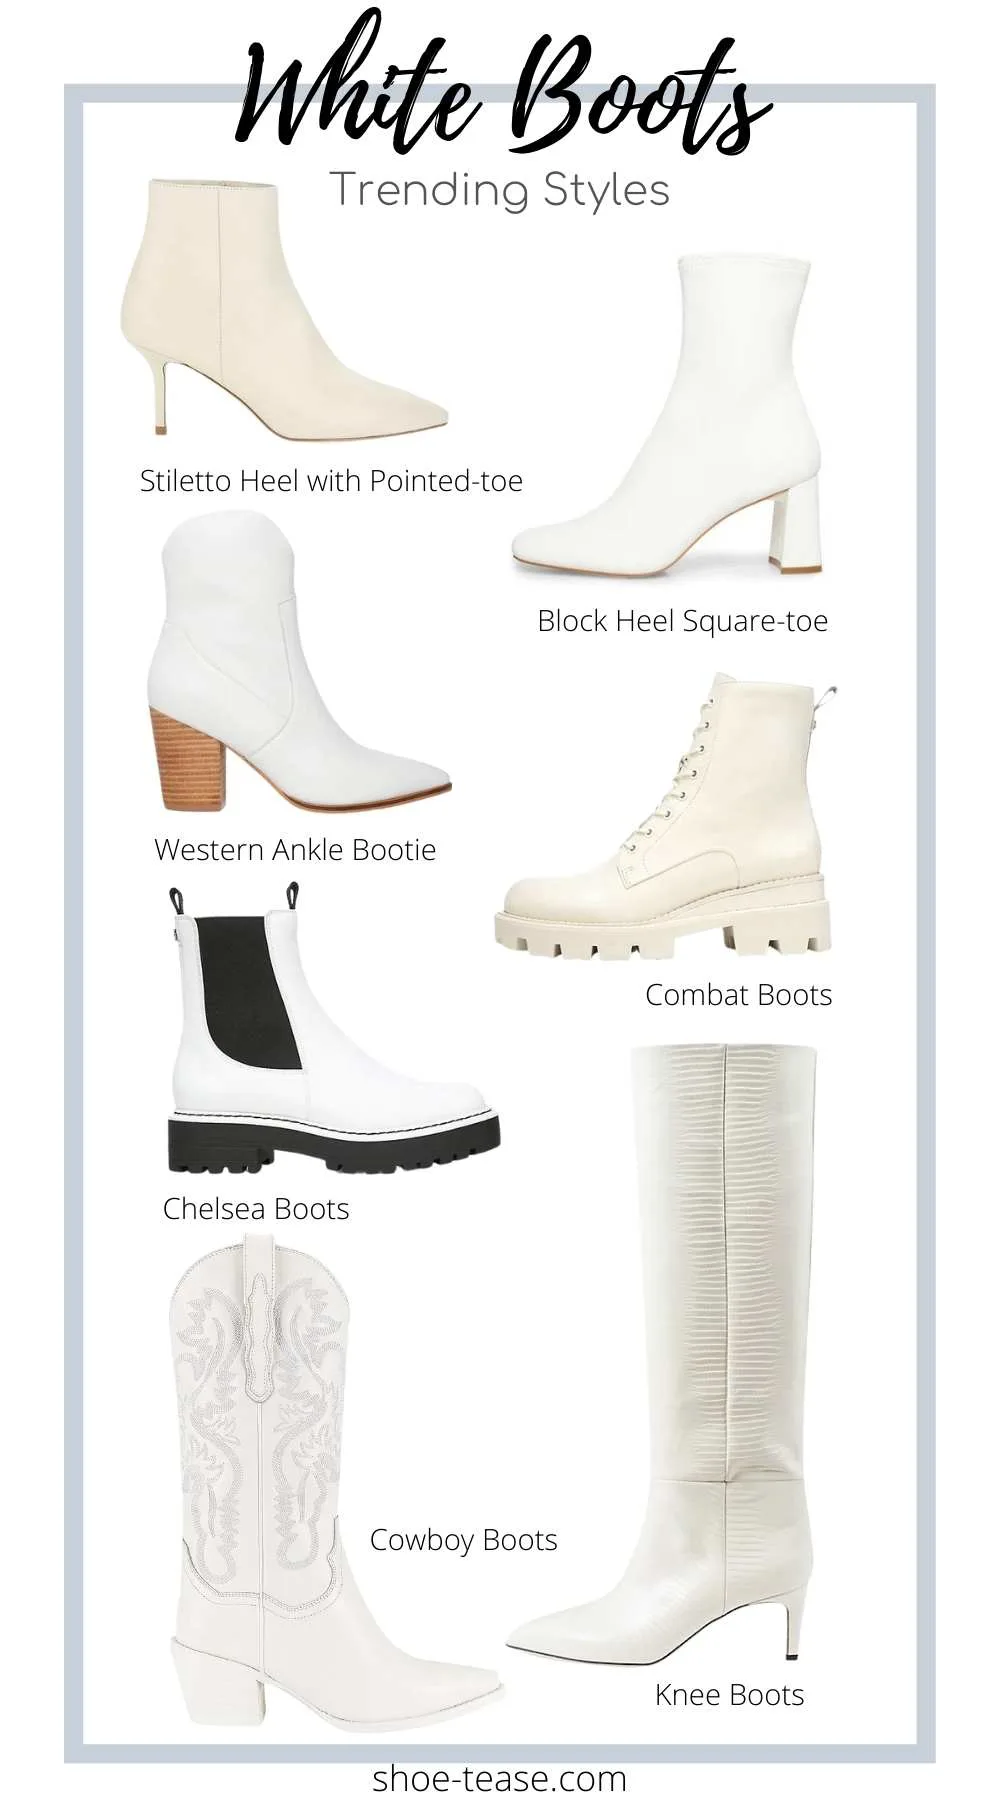 Collage of 7 types of trending white boots for women.